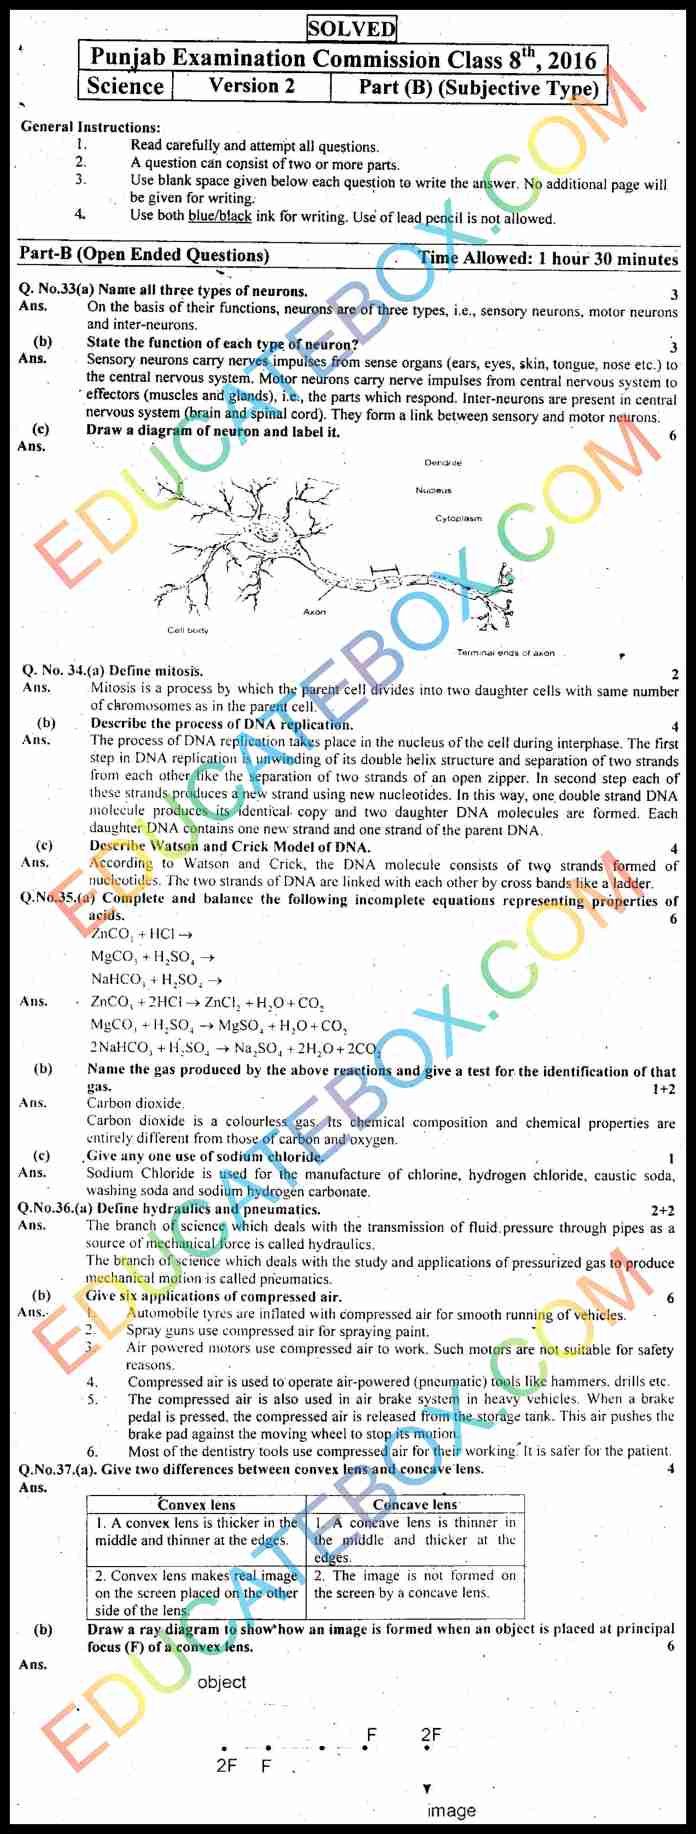 Past Paper 8th Class Science 2016 Solved Paper Punjab Board (PEC) Subjective Type Version 2